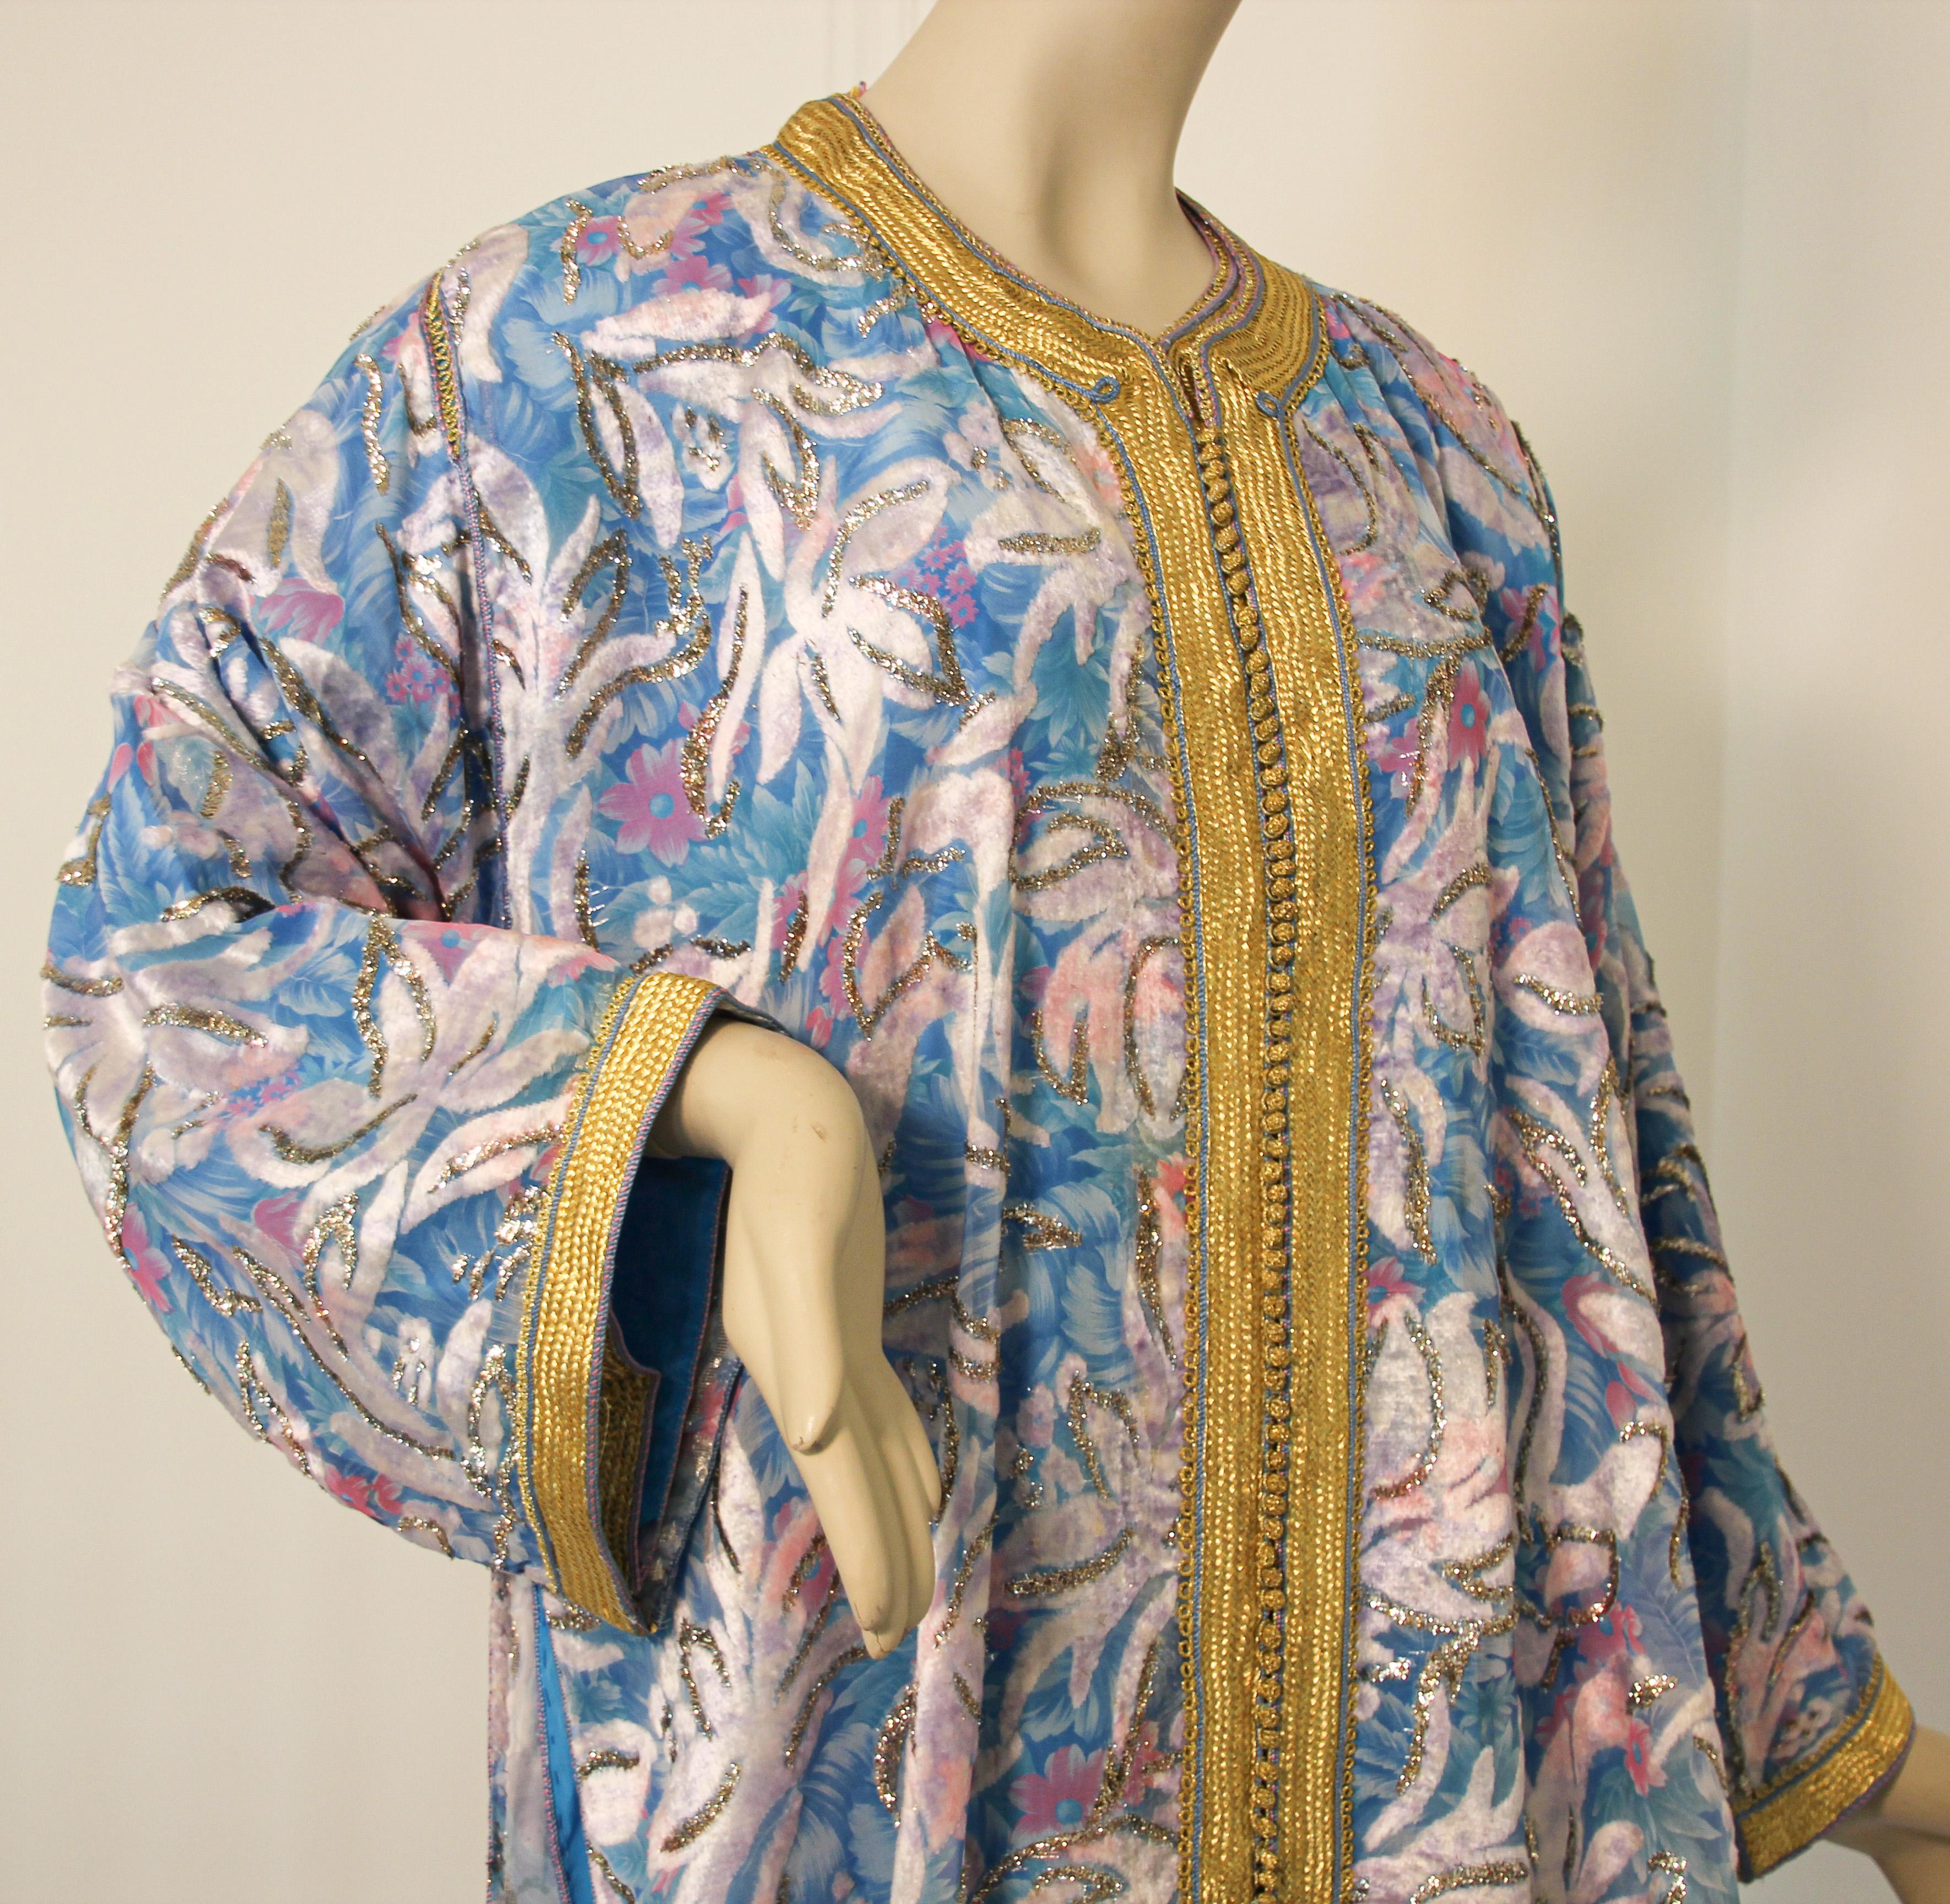 Moroccan Kaftan in Turquoise and Gold Floral Brocade Metallic Lame In Good Condition For Sale In North Hollywood, CA